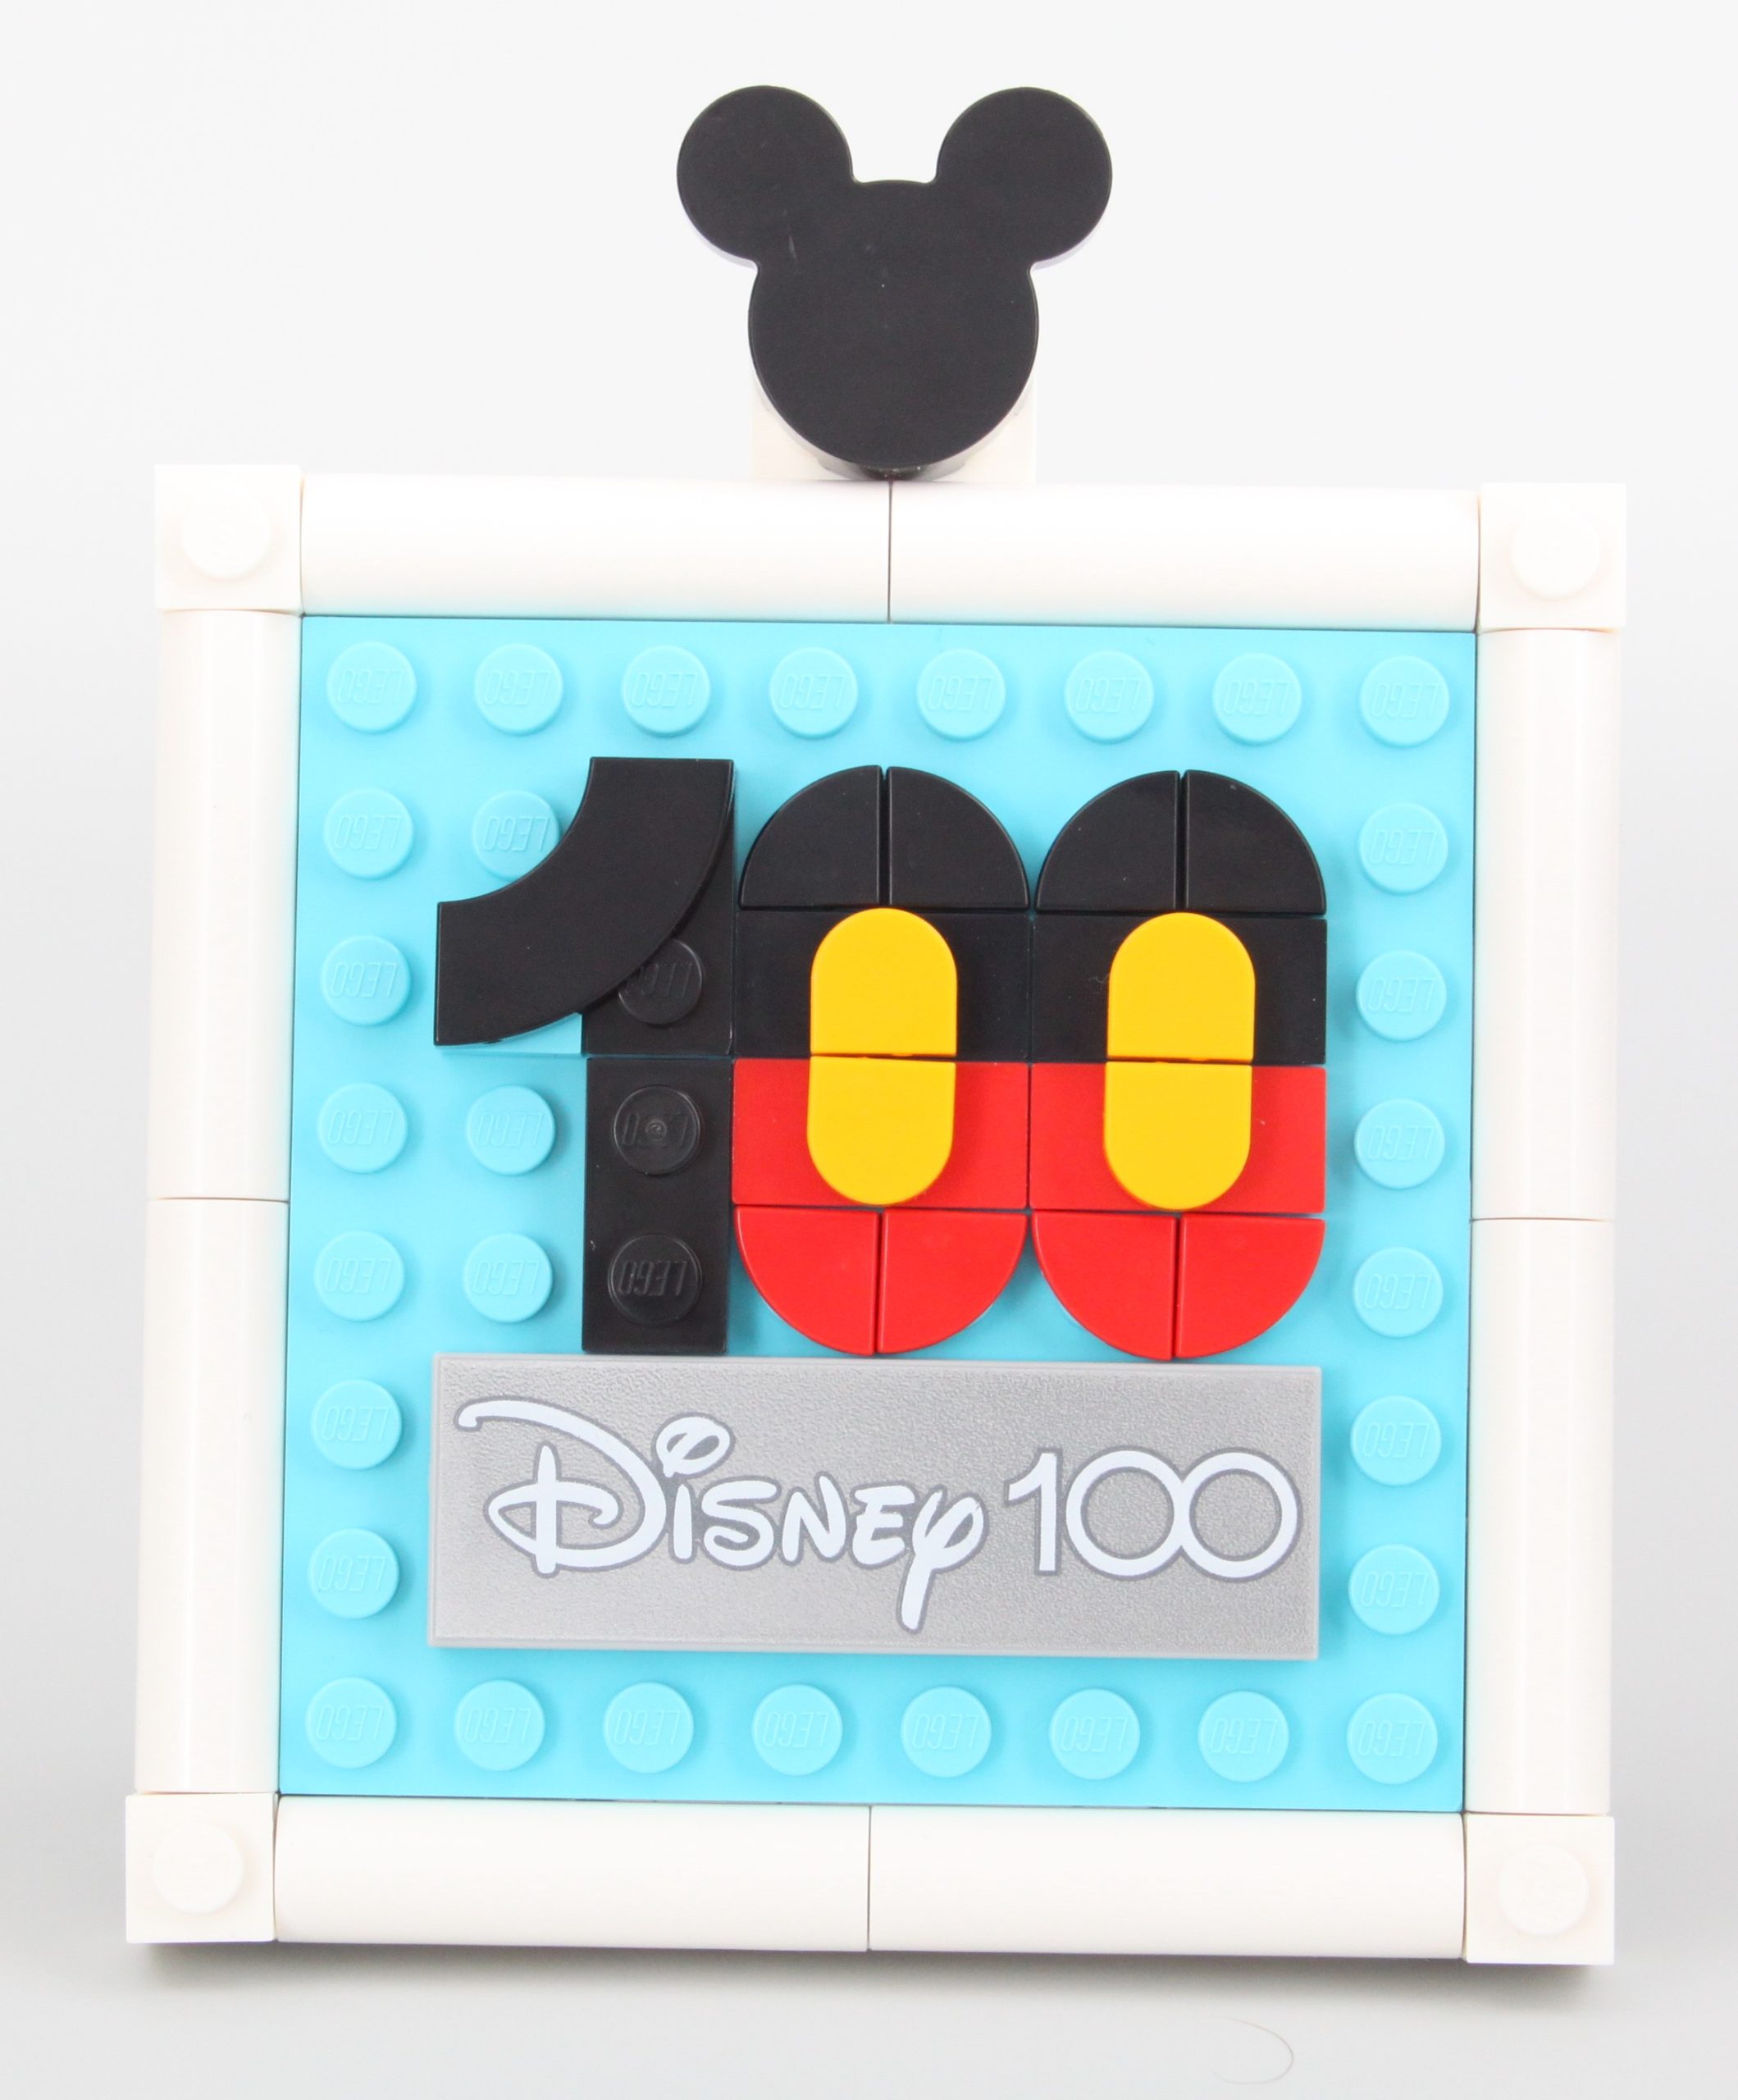 LEGO officially reveals two more Disney 100 sets, including 43221